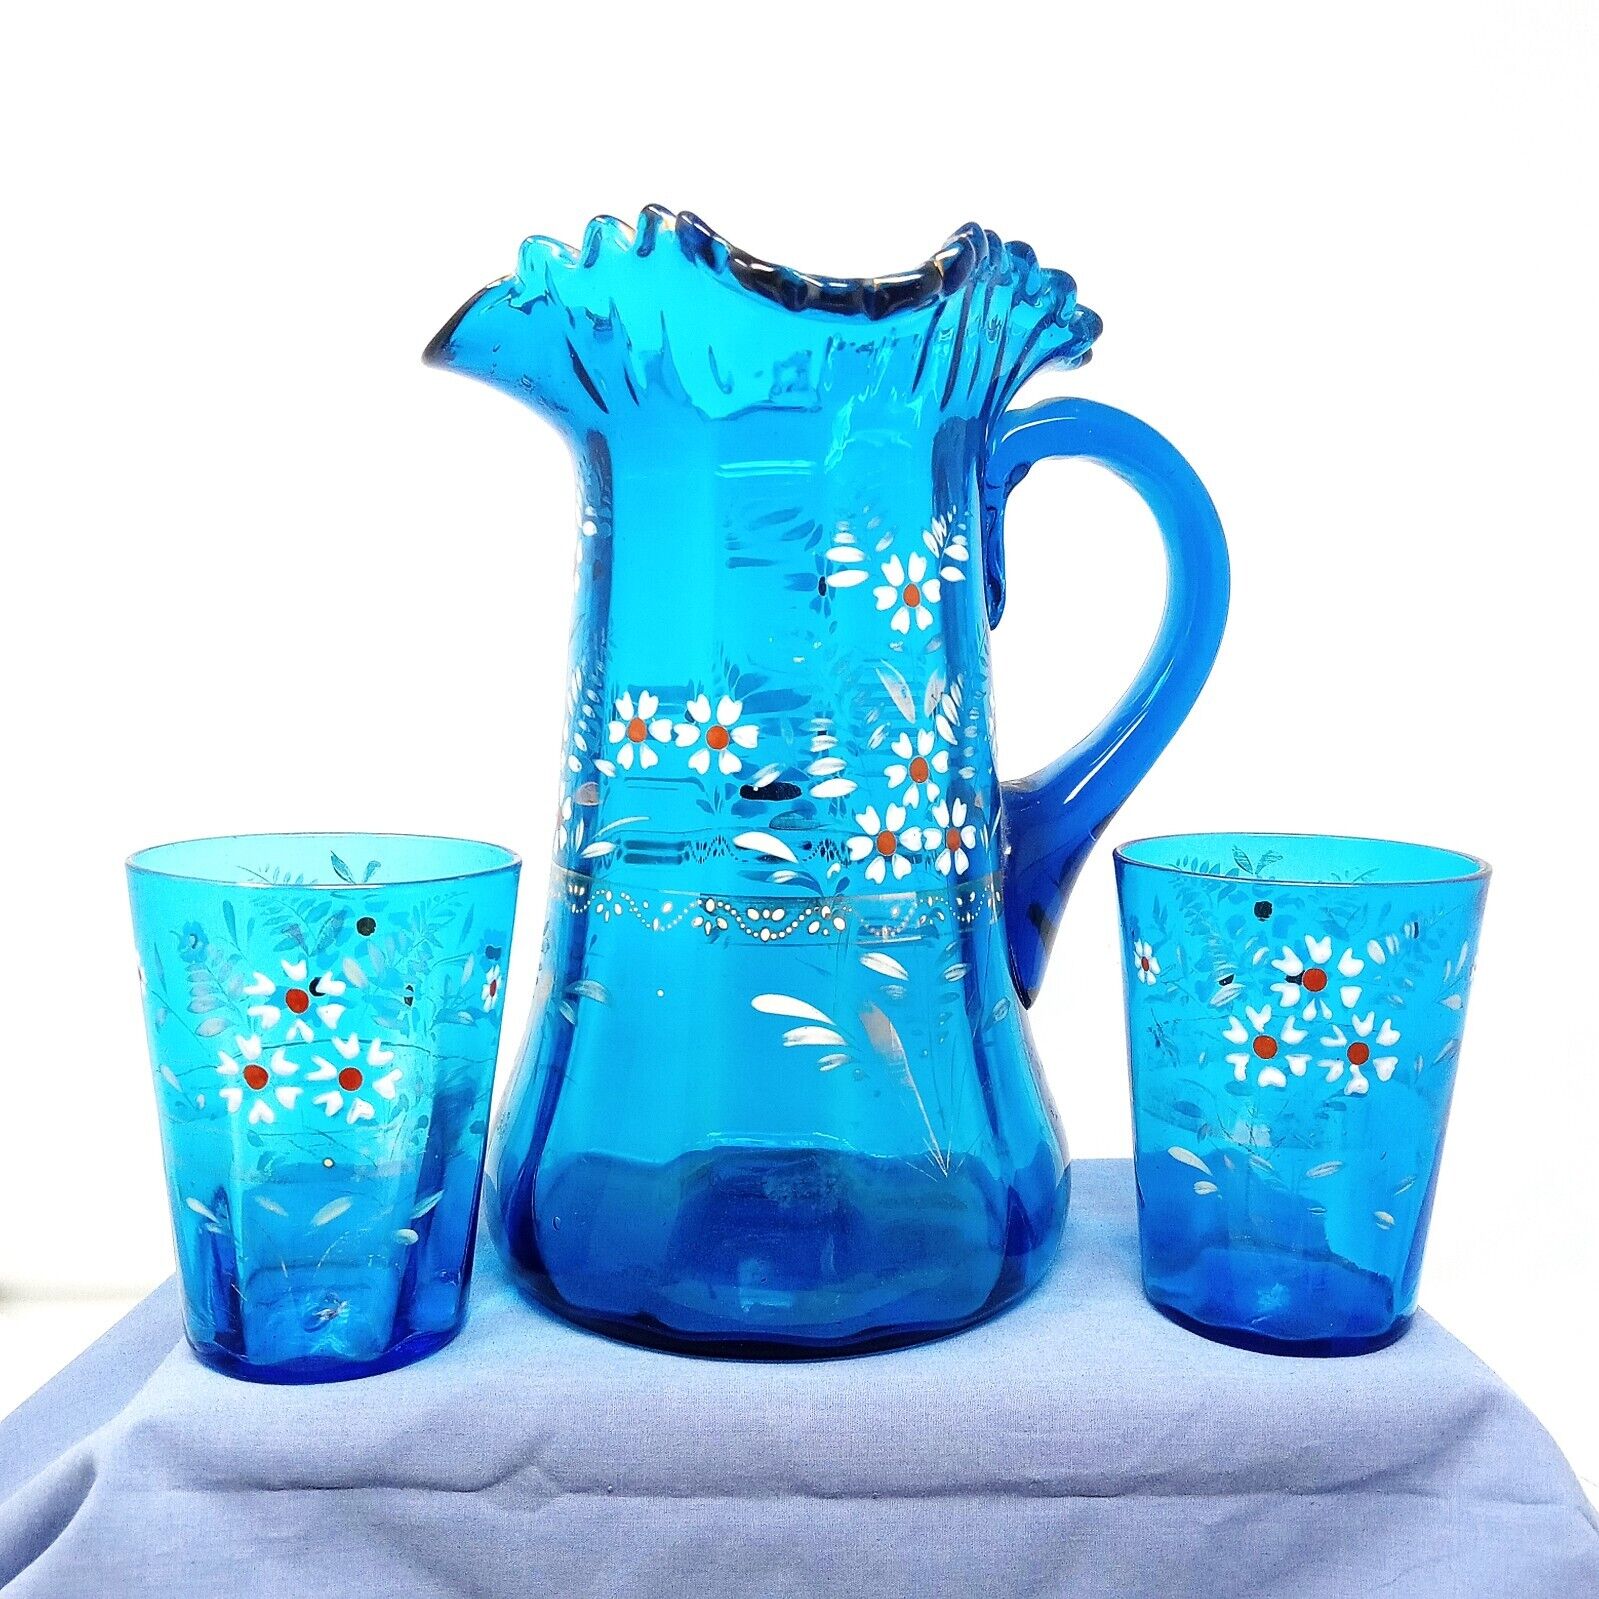 Antique Victorian Ruffled Pitcher 2 Tumblers Blue Hand Blown Painted Flowers